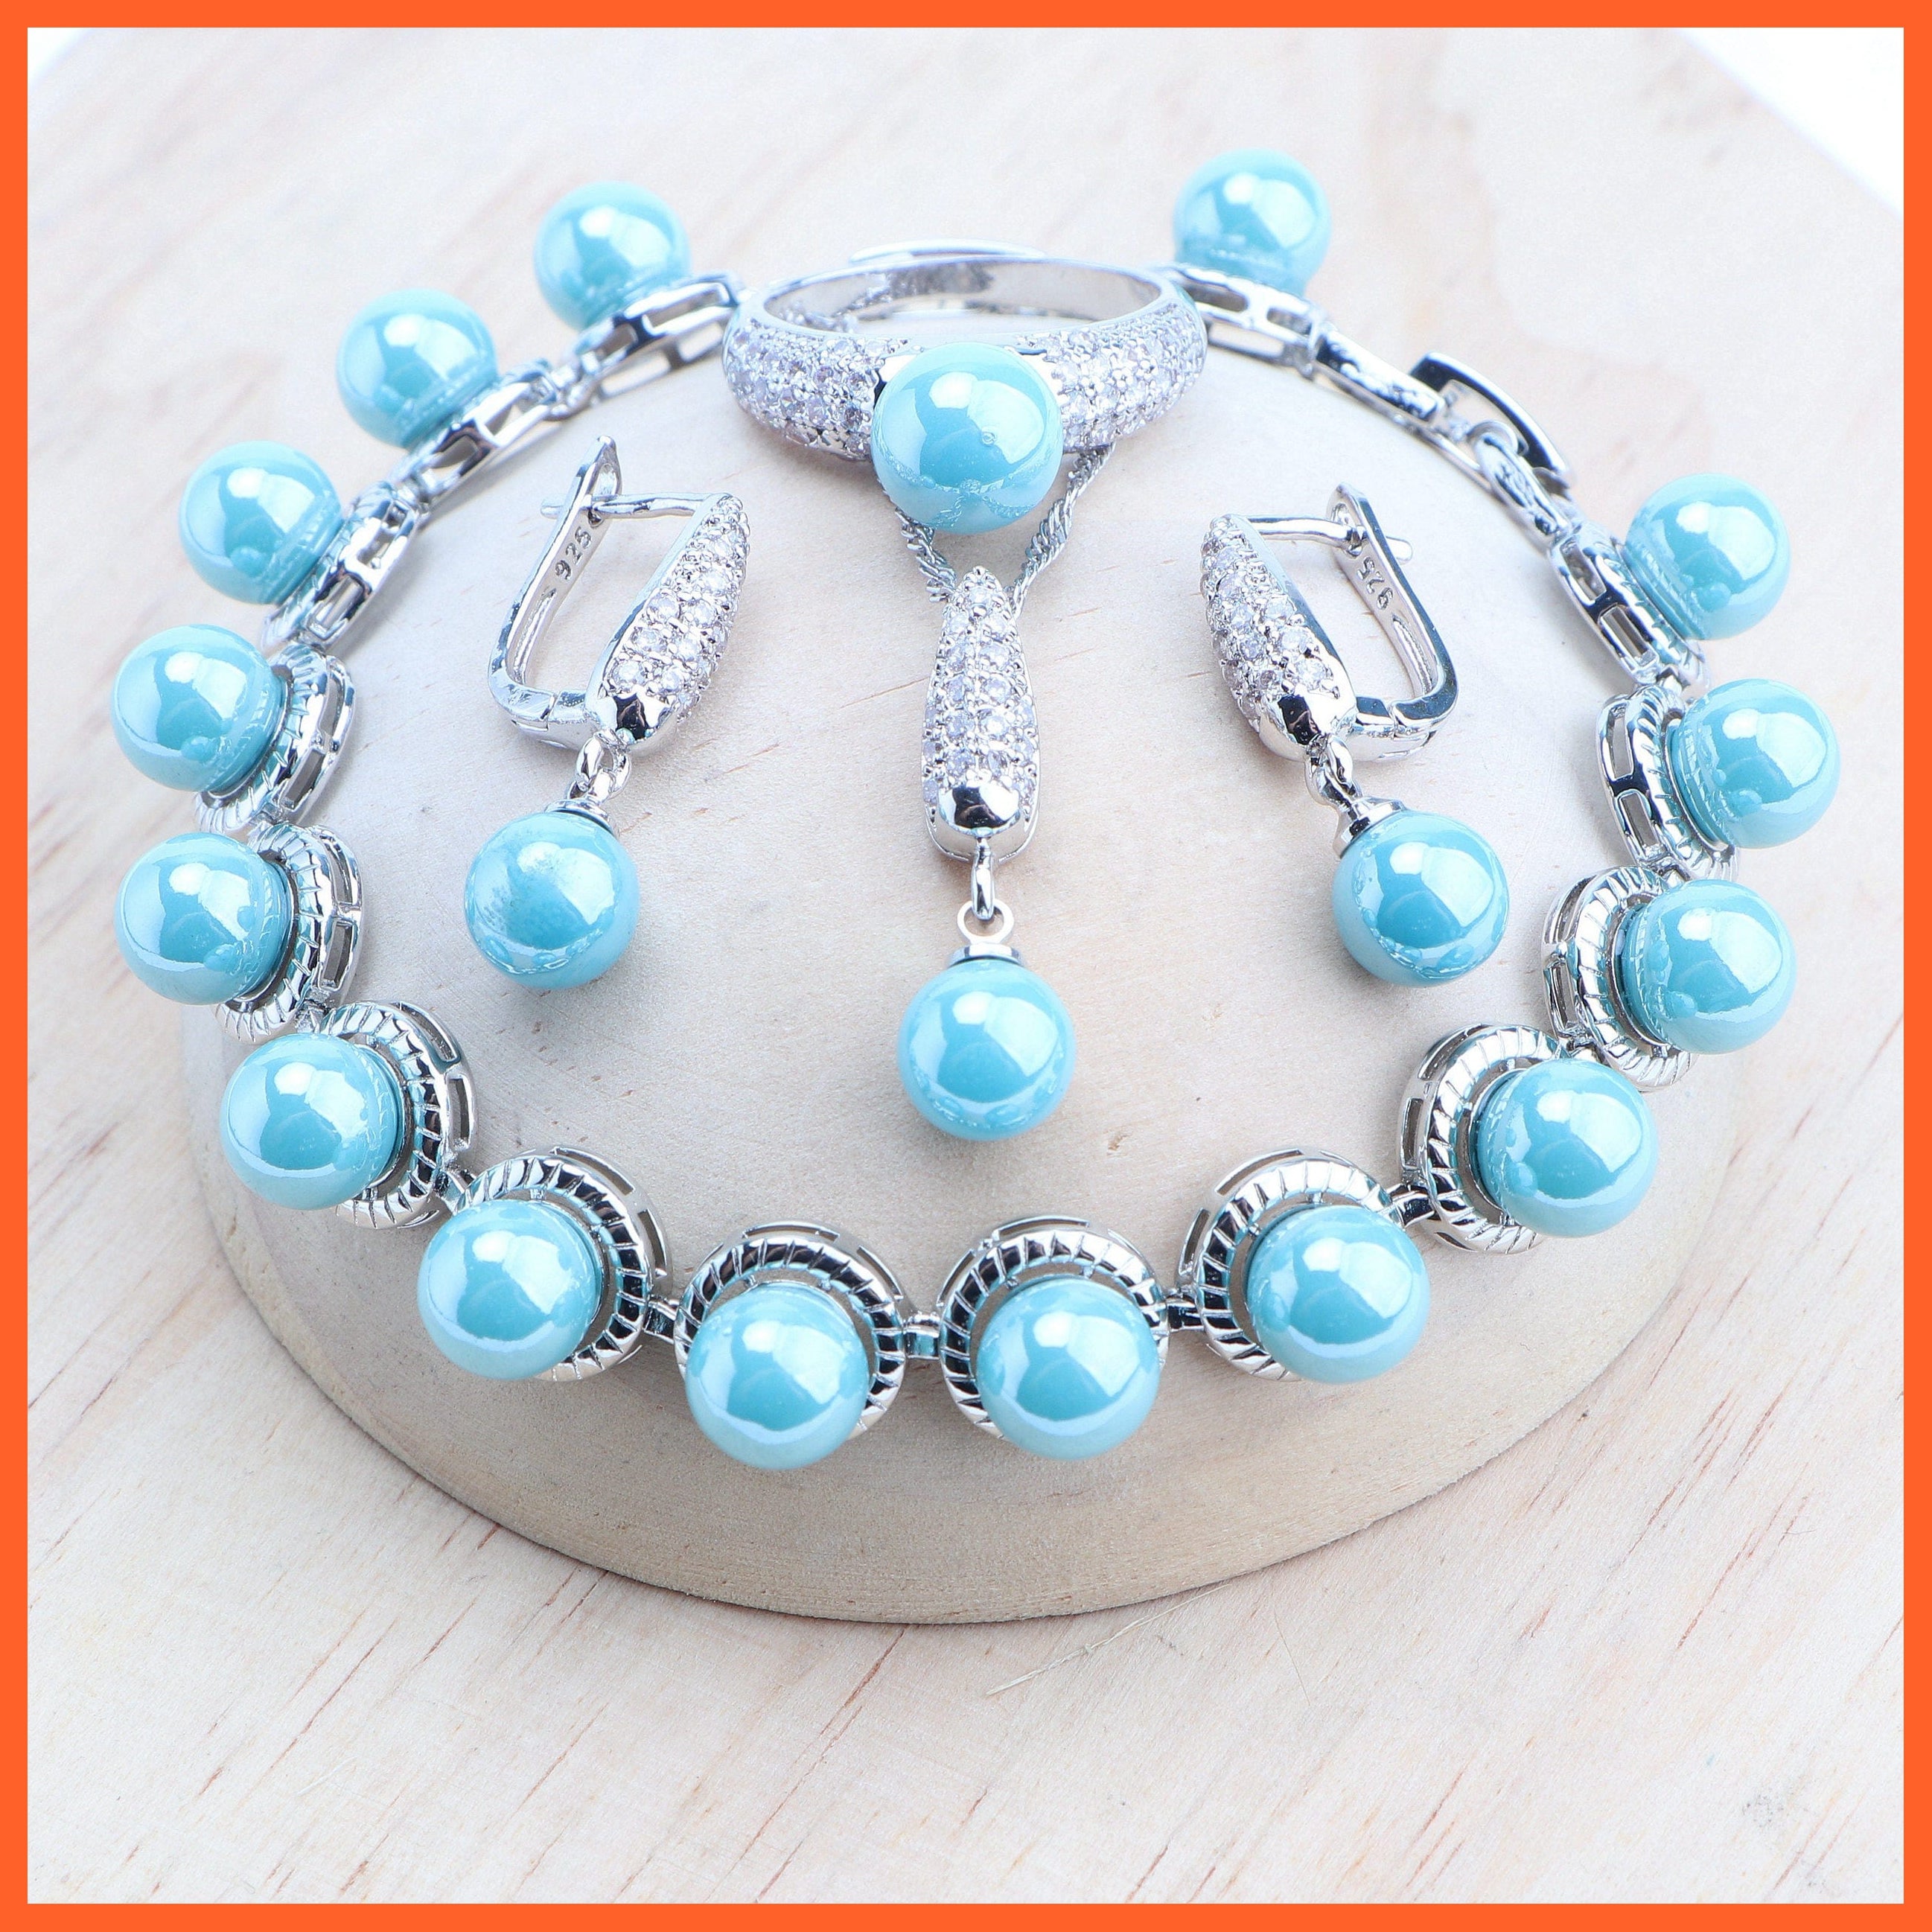 whatagift.com.au 4PCS-Light Blue / 6 Black Pearls 925 Silver Ring Bracelets Earrings Pendants Necklace Set For Women | Best Gift for Women Day Mothers Day Valentines Day